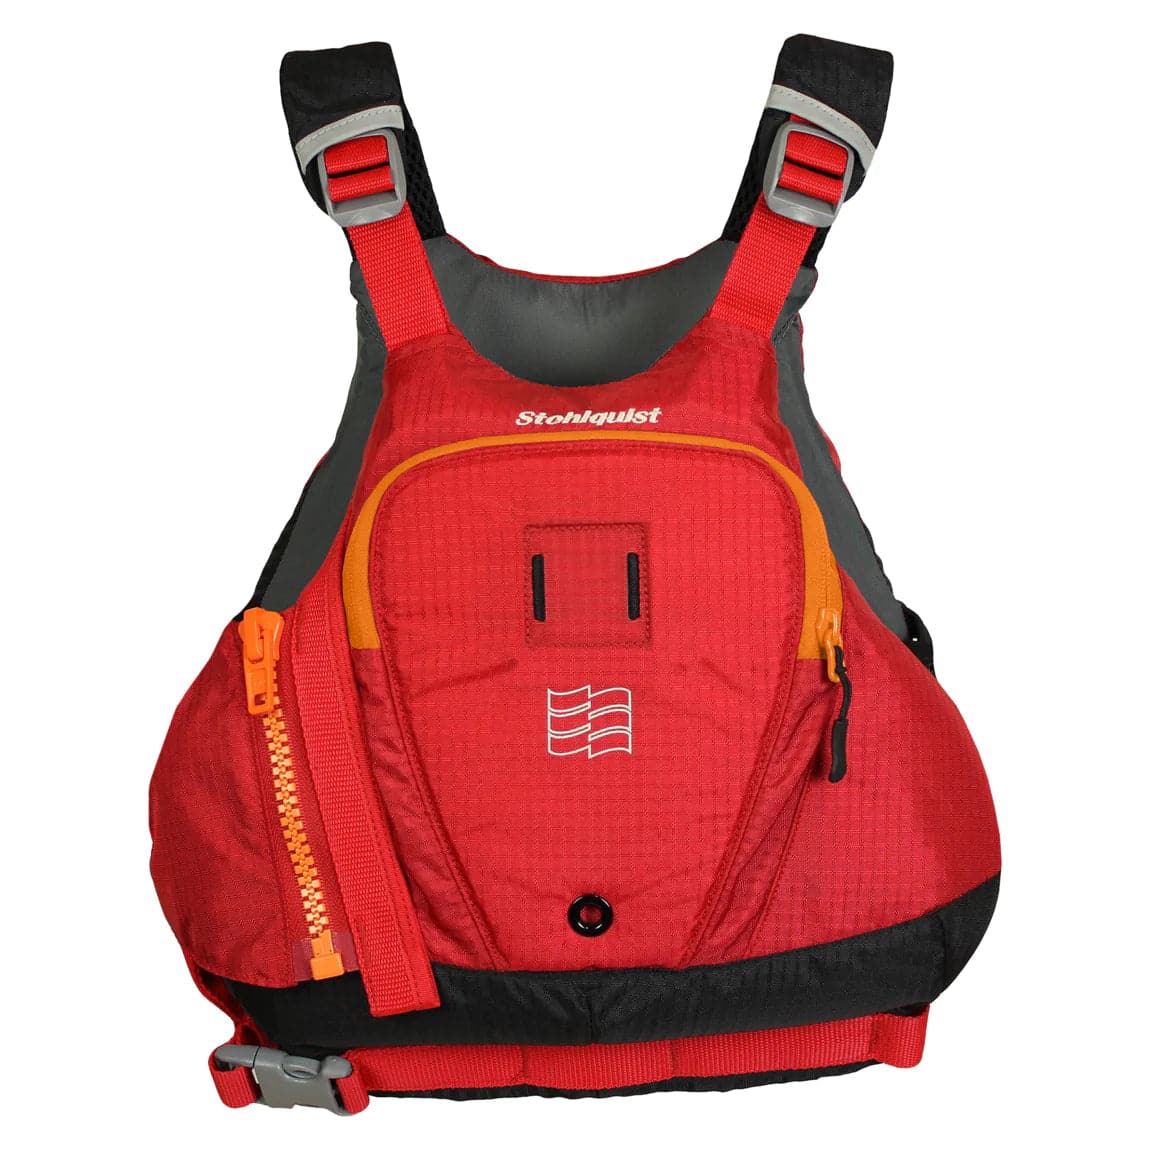 Featuring the Edge PFD men's pfd manufactured by Stohlquist shown here from one angle.